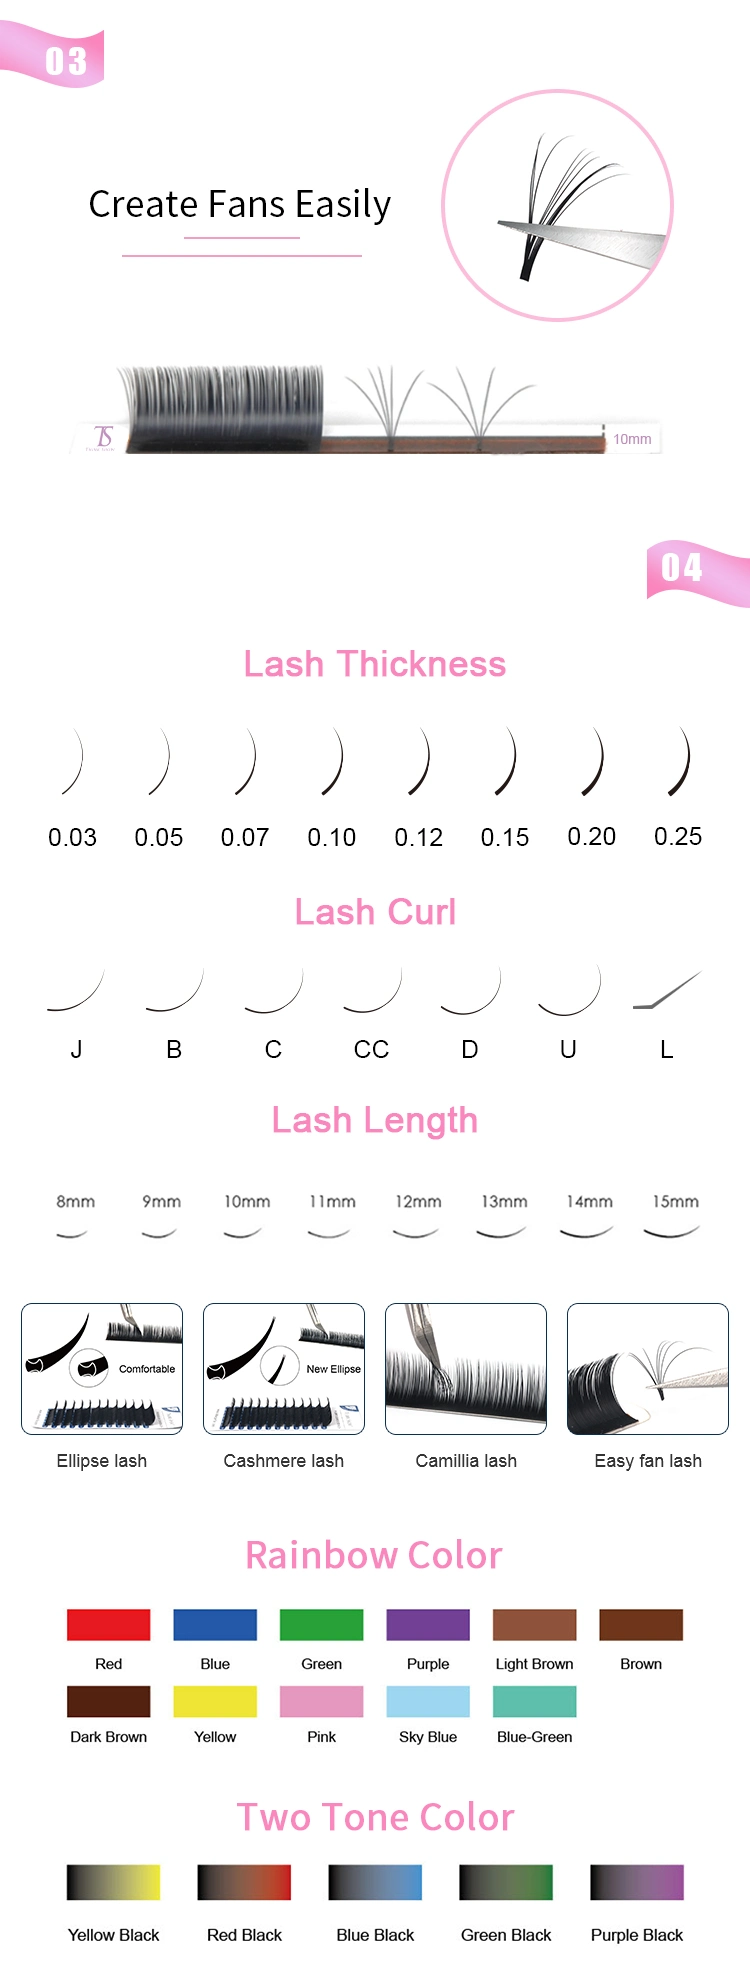 12 Lines 0.15mm Thickness C Curl Standard 13mm Faux Eyelash Extension